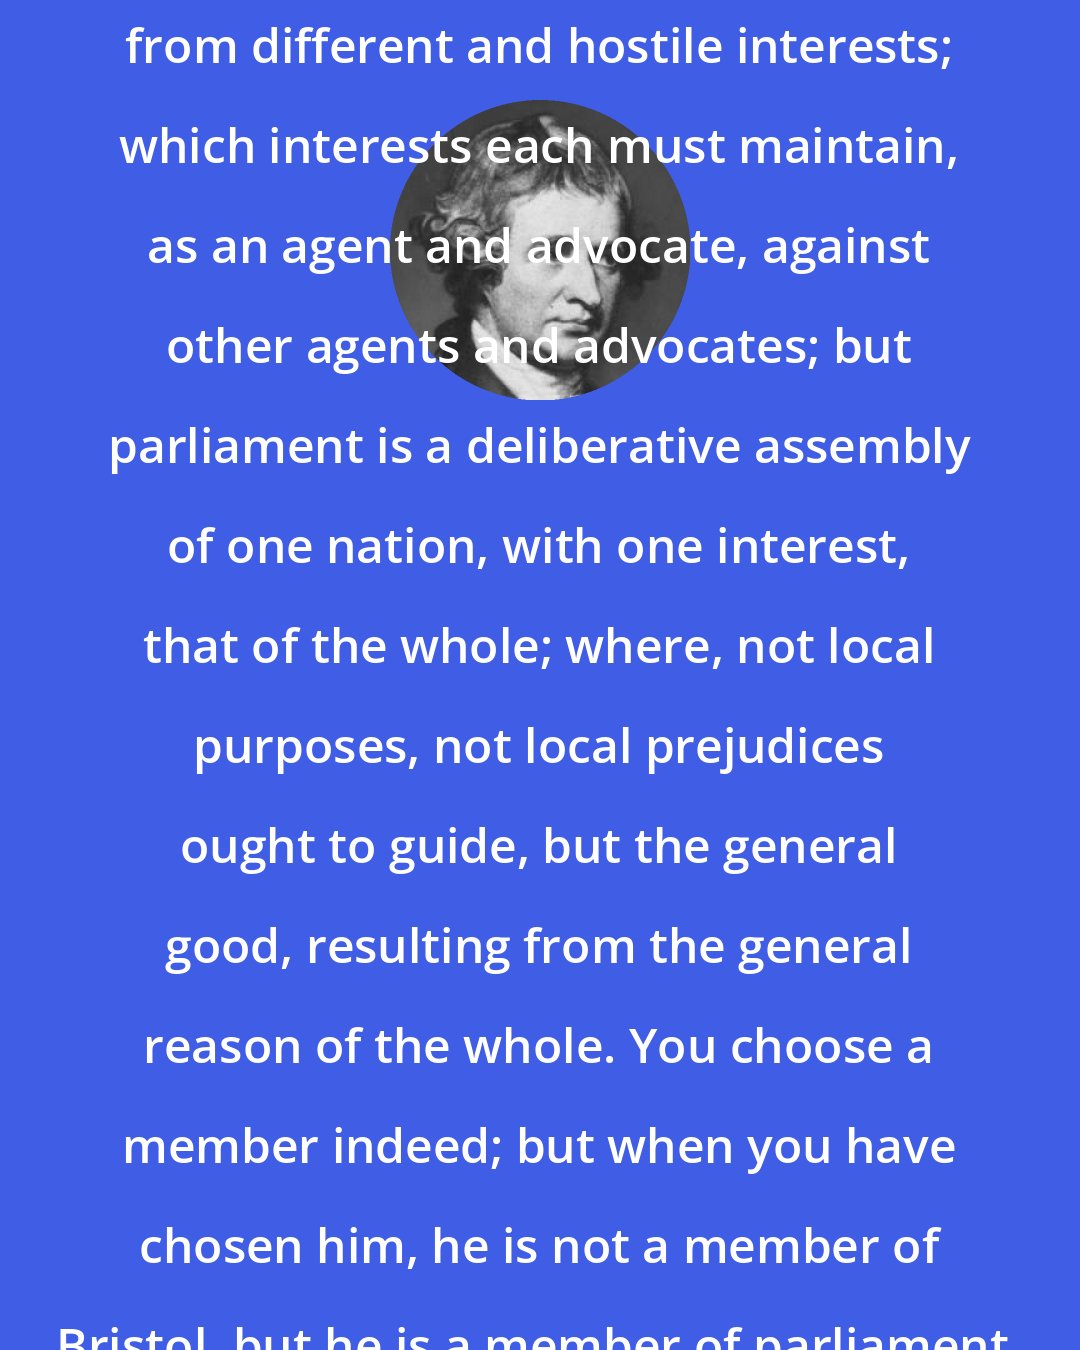 Edmund Burke: Parliament is not a congress of ambassadors from different and hostile interests; which interests each must maintain, as an agent and advocate, against other agents and advocates; but parliament is a deliberative assembly of one nation, with one interest, that of the whole; where, not local purposes, not local prejudices ought to guide, but the general good, resulting from the general reason of the whole. You choose a member indeed; but when you have chosen him, he is not a member of Bristol, but he is a member of parliament.